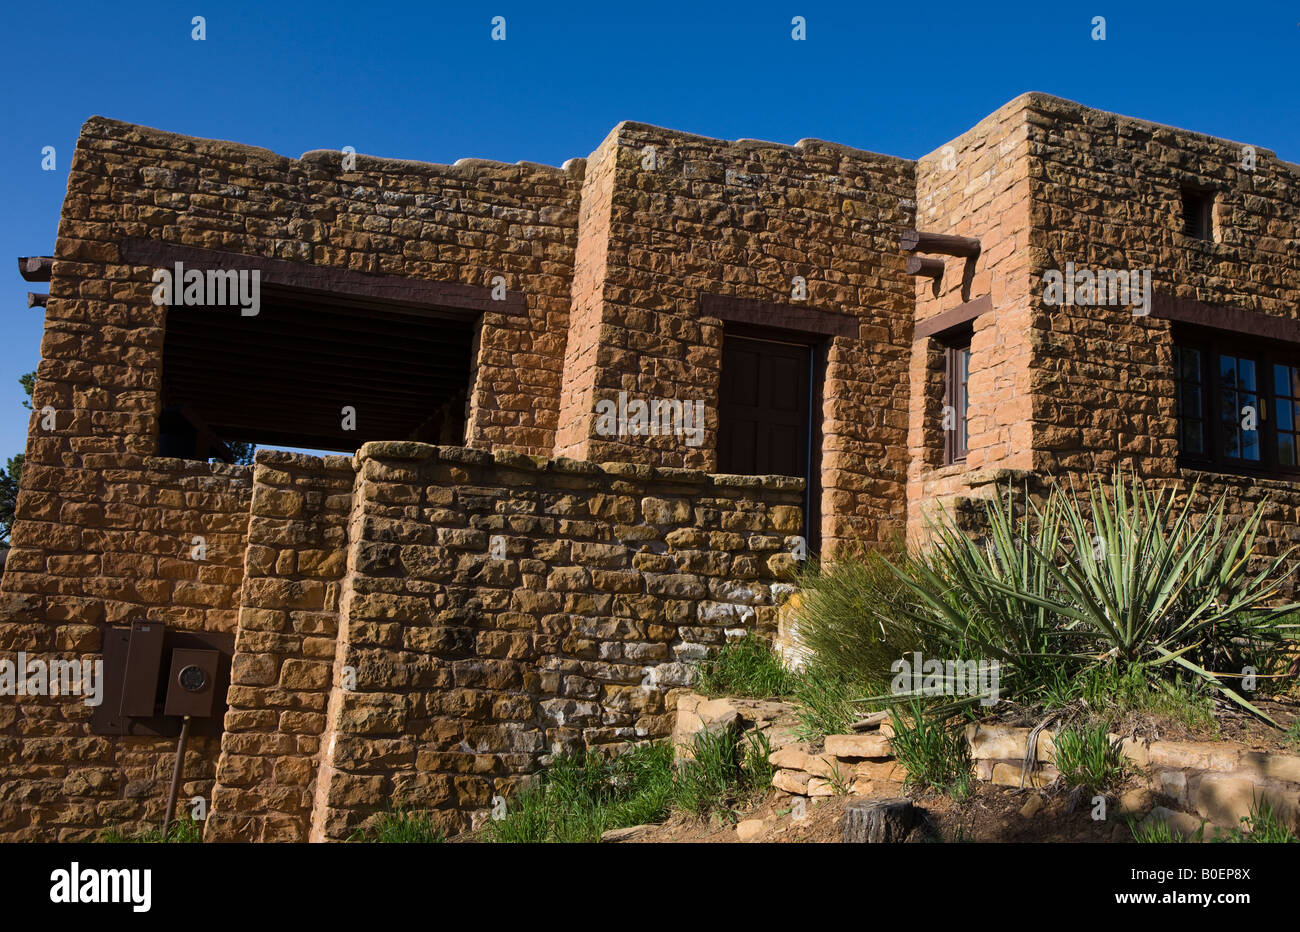 Administrative building designed to mimic the cliff dwellings at the Park Headquarters of Mesa Verde National Park Stock Photo